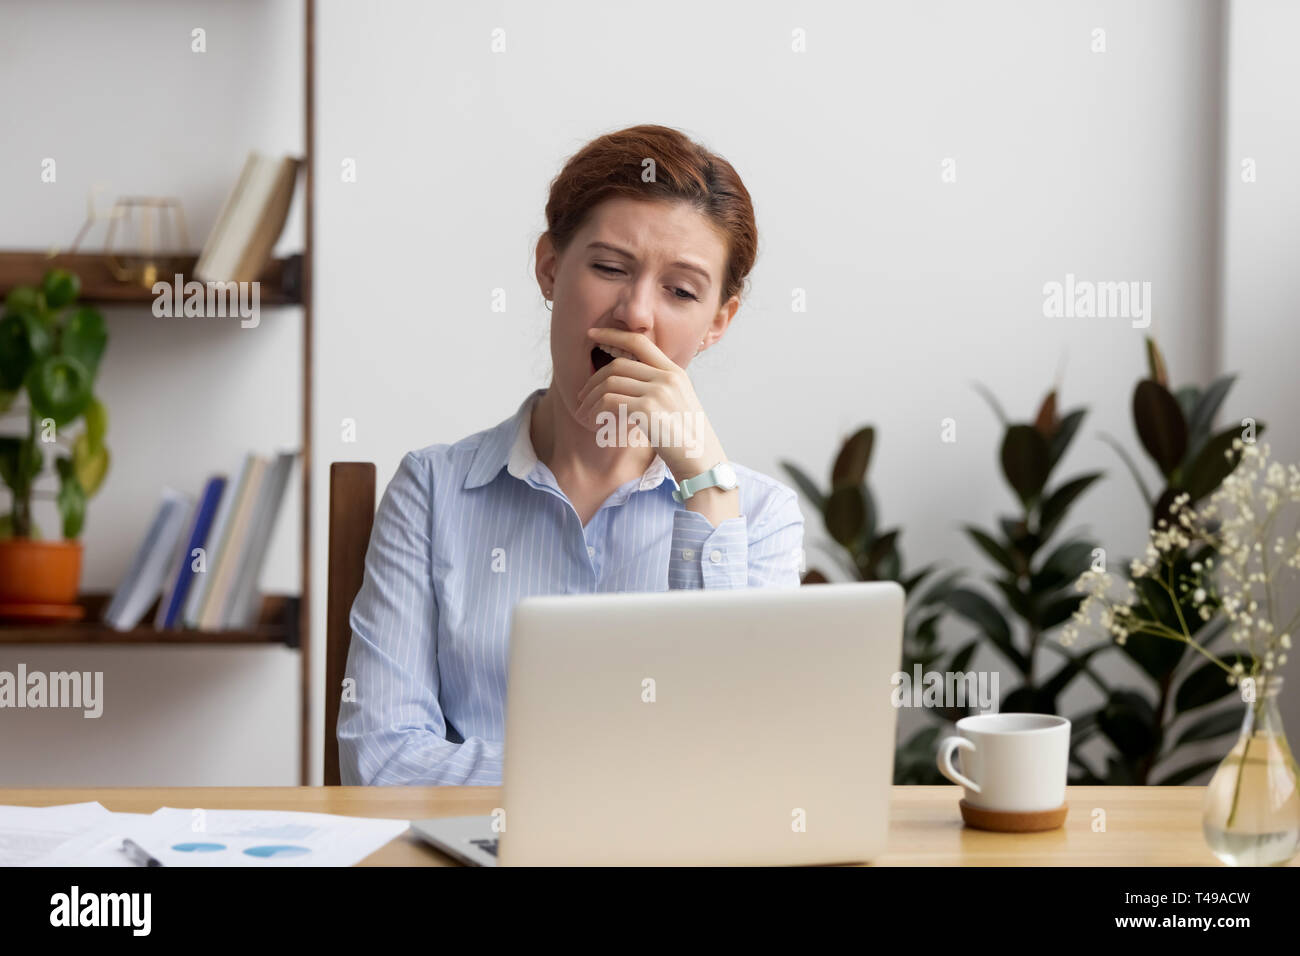 Sleepy bored businesswoman yawning at workplace feeling deprived in office Stock Photo